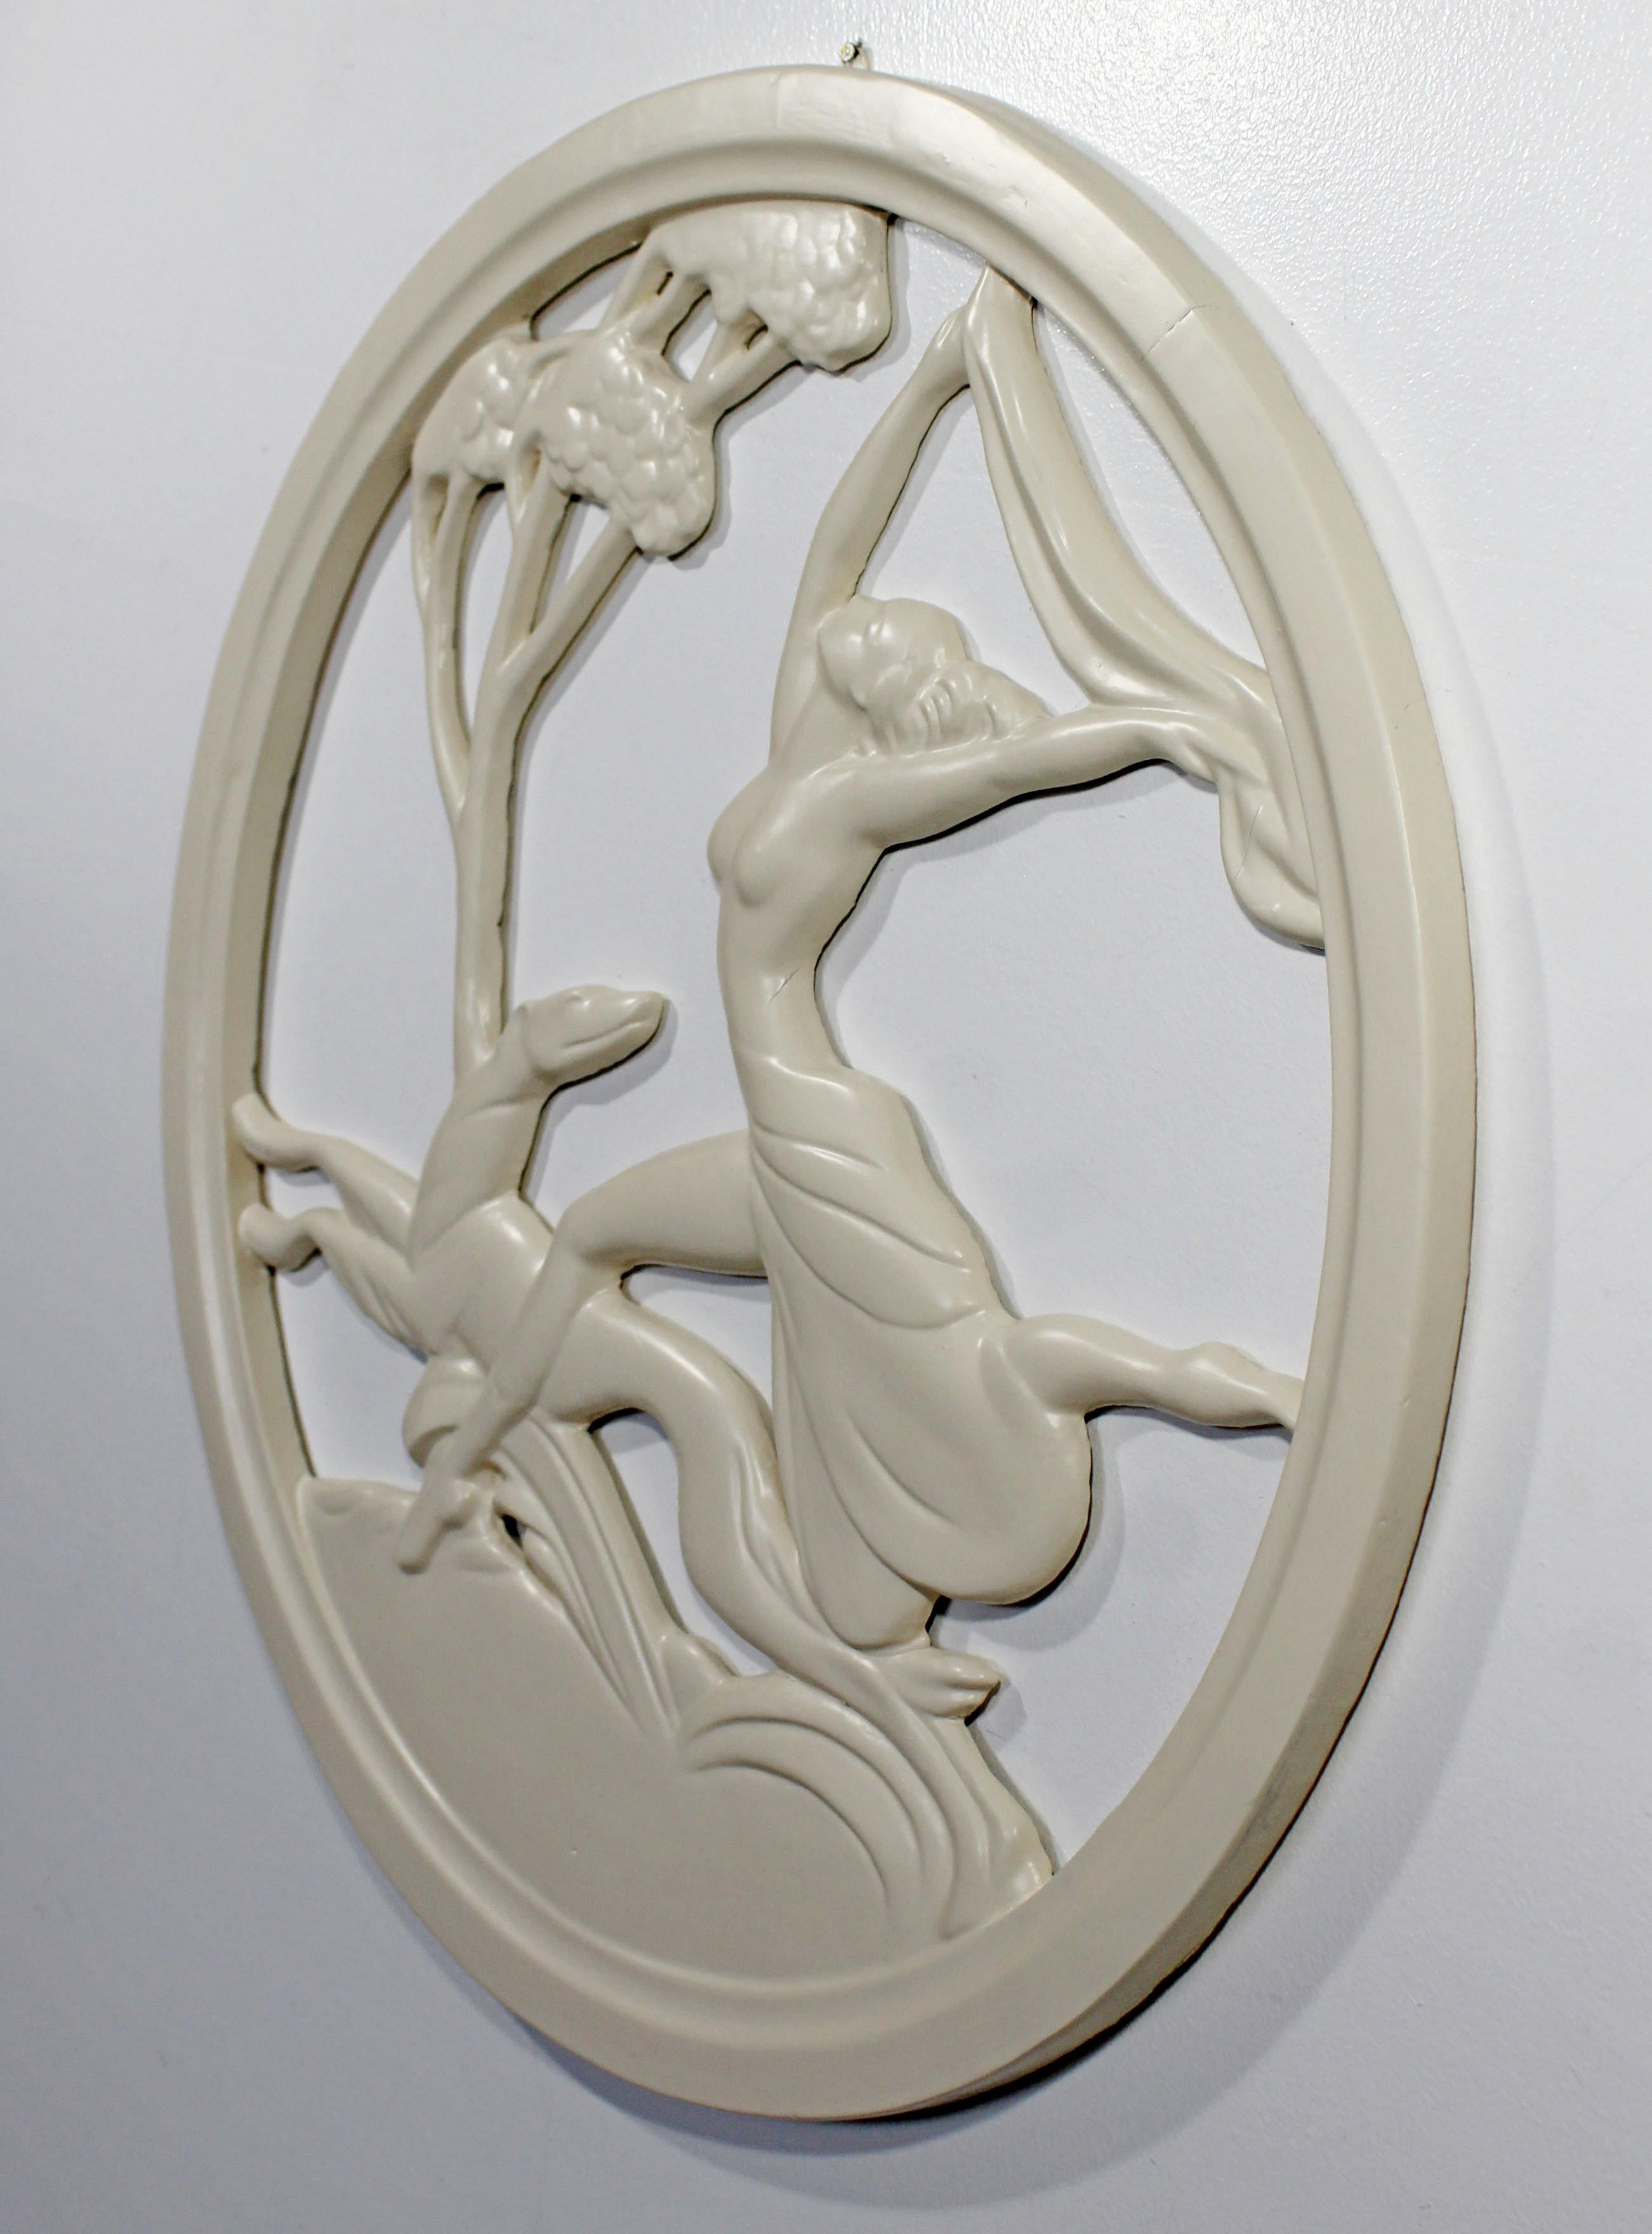 American Art Deco Plaster Medallion from New Orleans Brothel of a Female & Greyhound